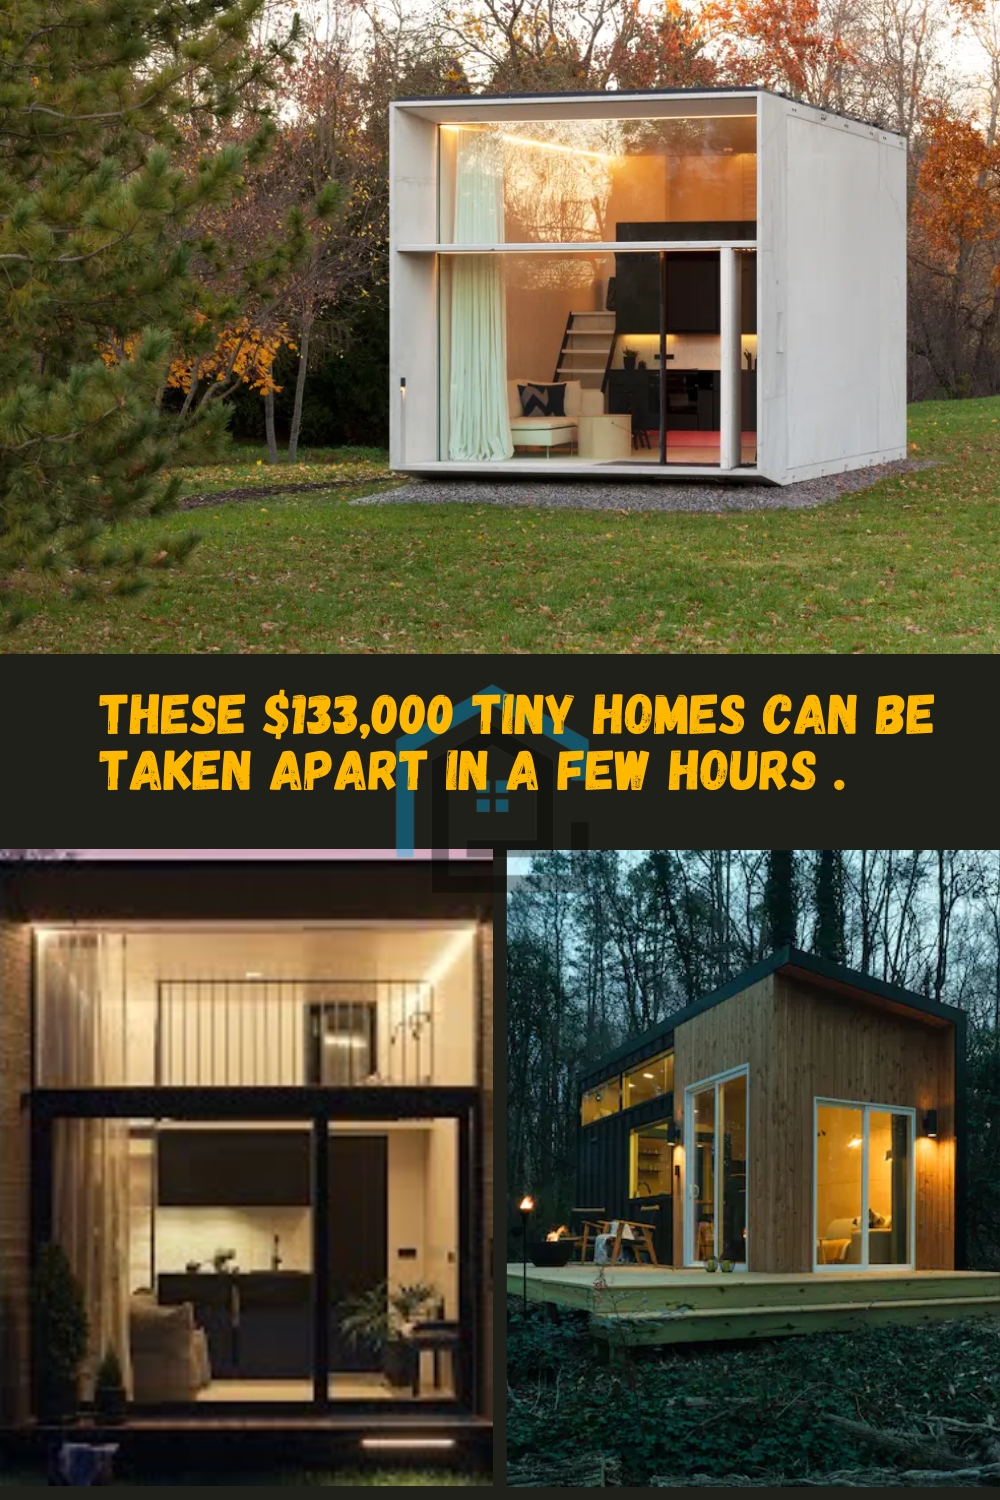 These $133,000 tiny homes can be taken apart in a few hours to move with their owners pin